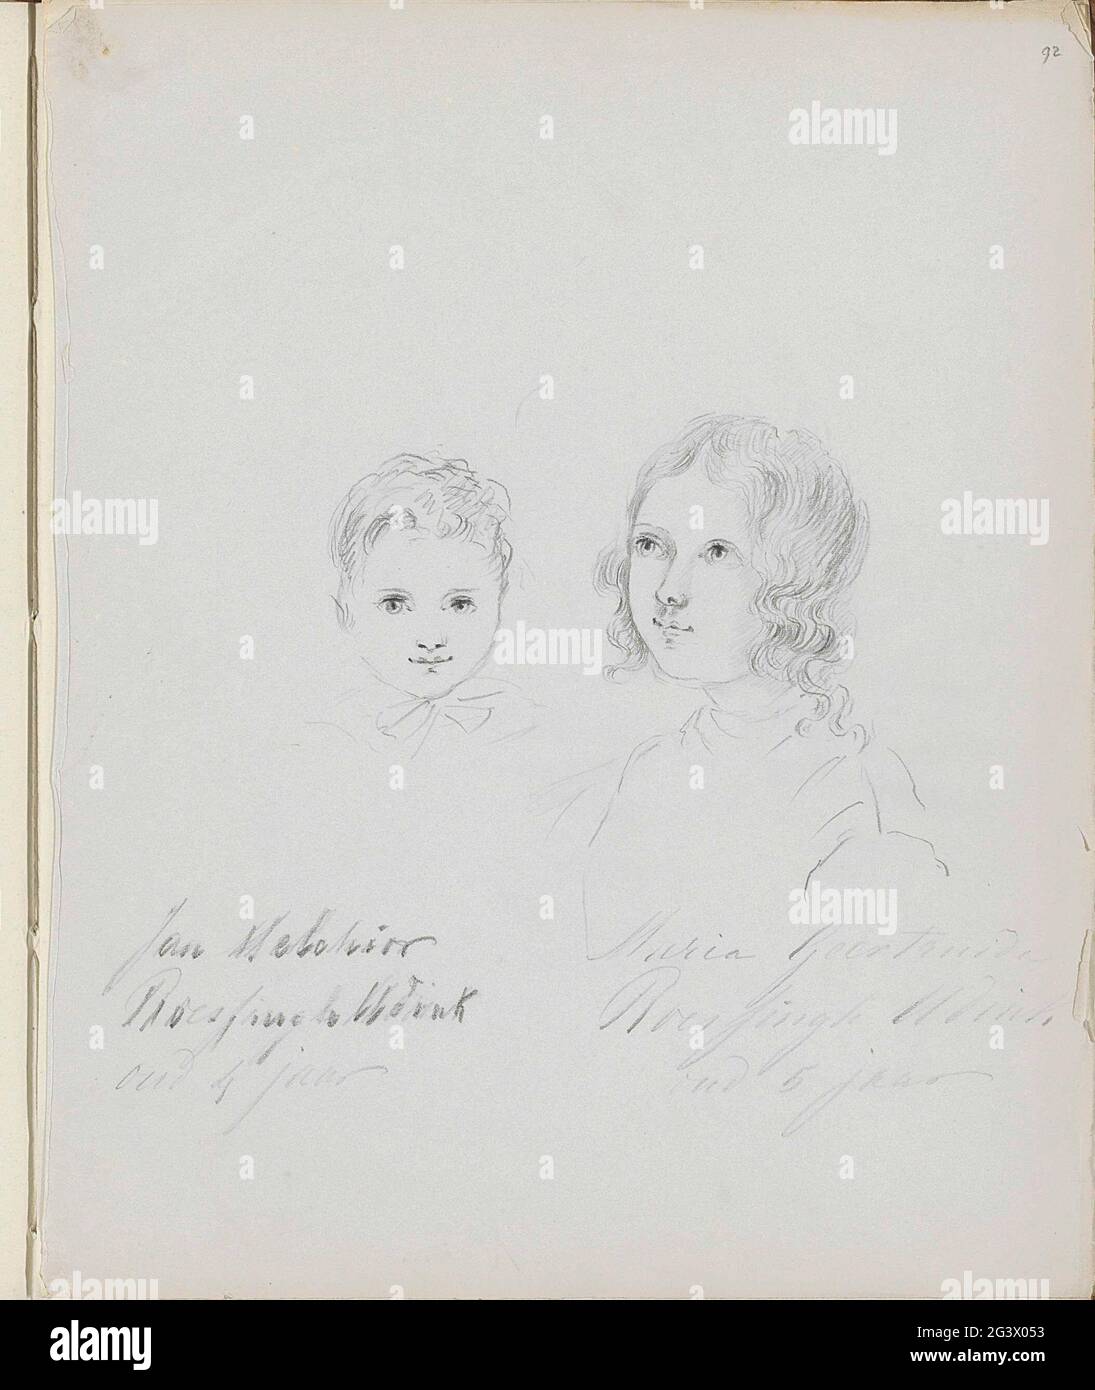 Portraits of Jan Melchior Roessingh Udink and Maria Geertruida ...